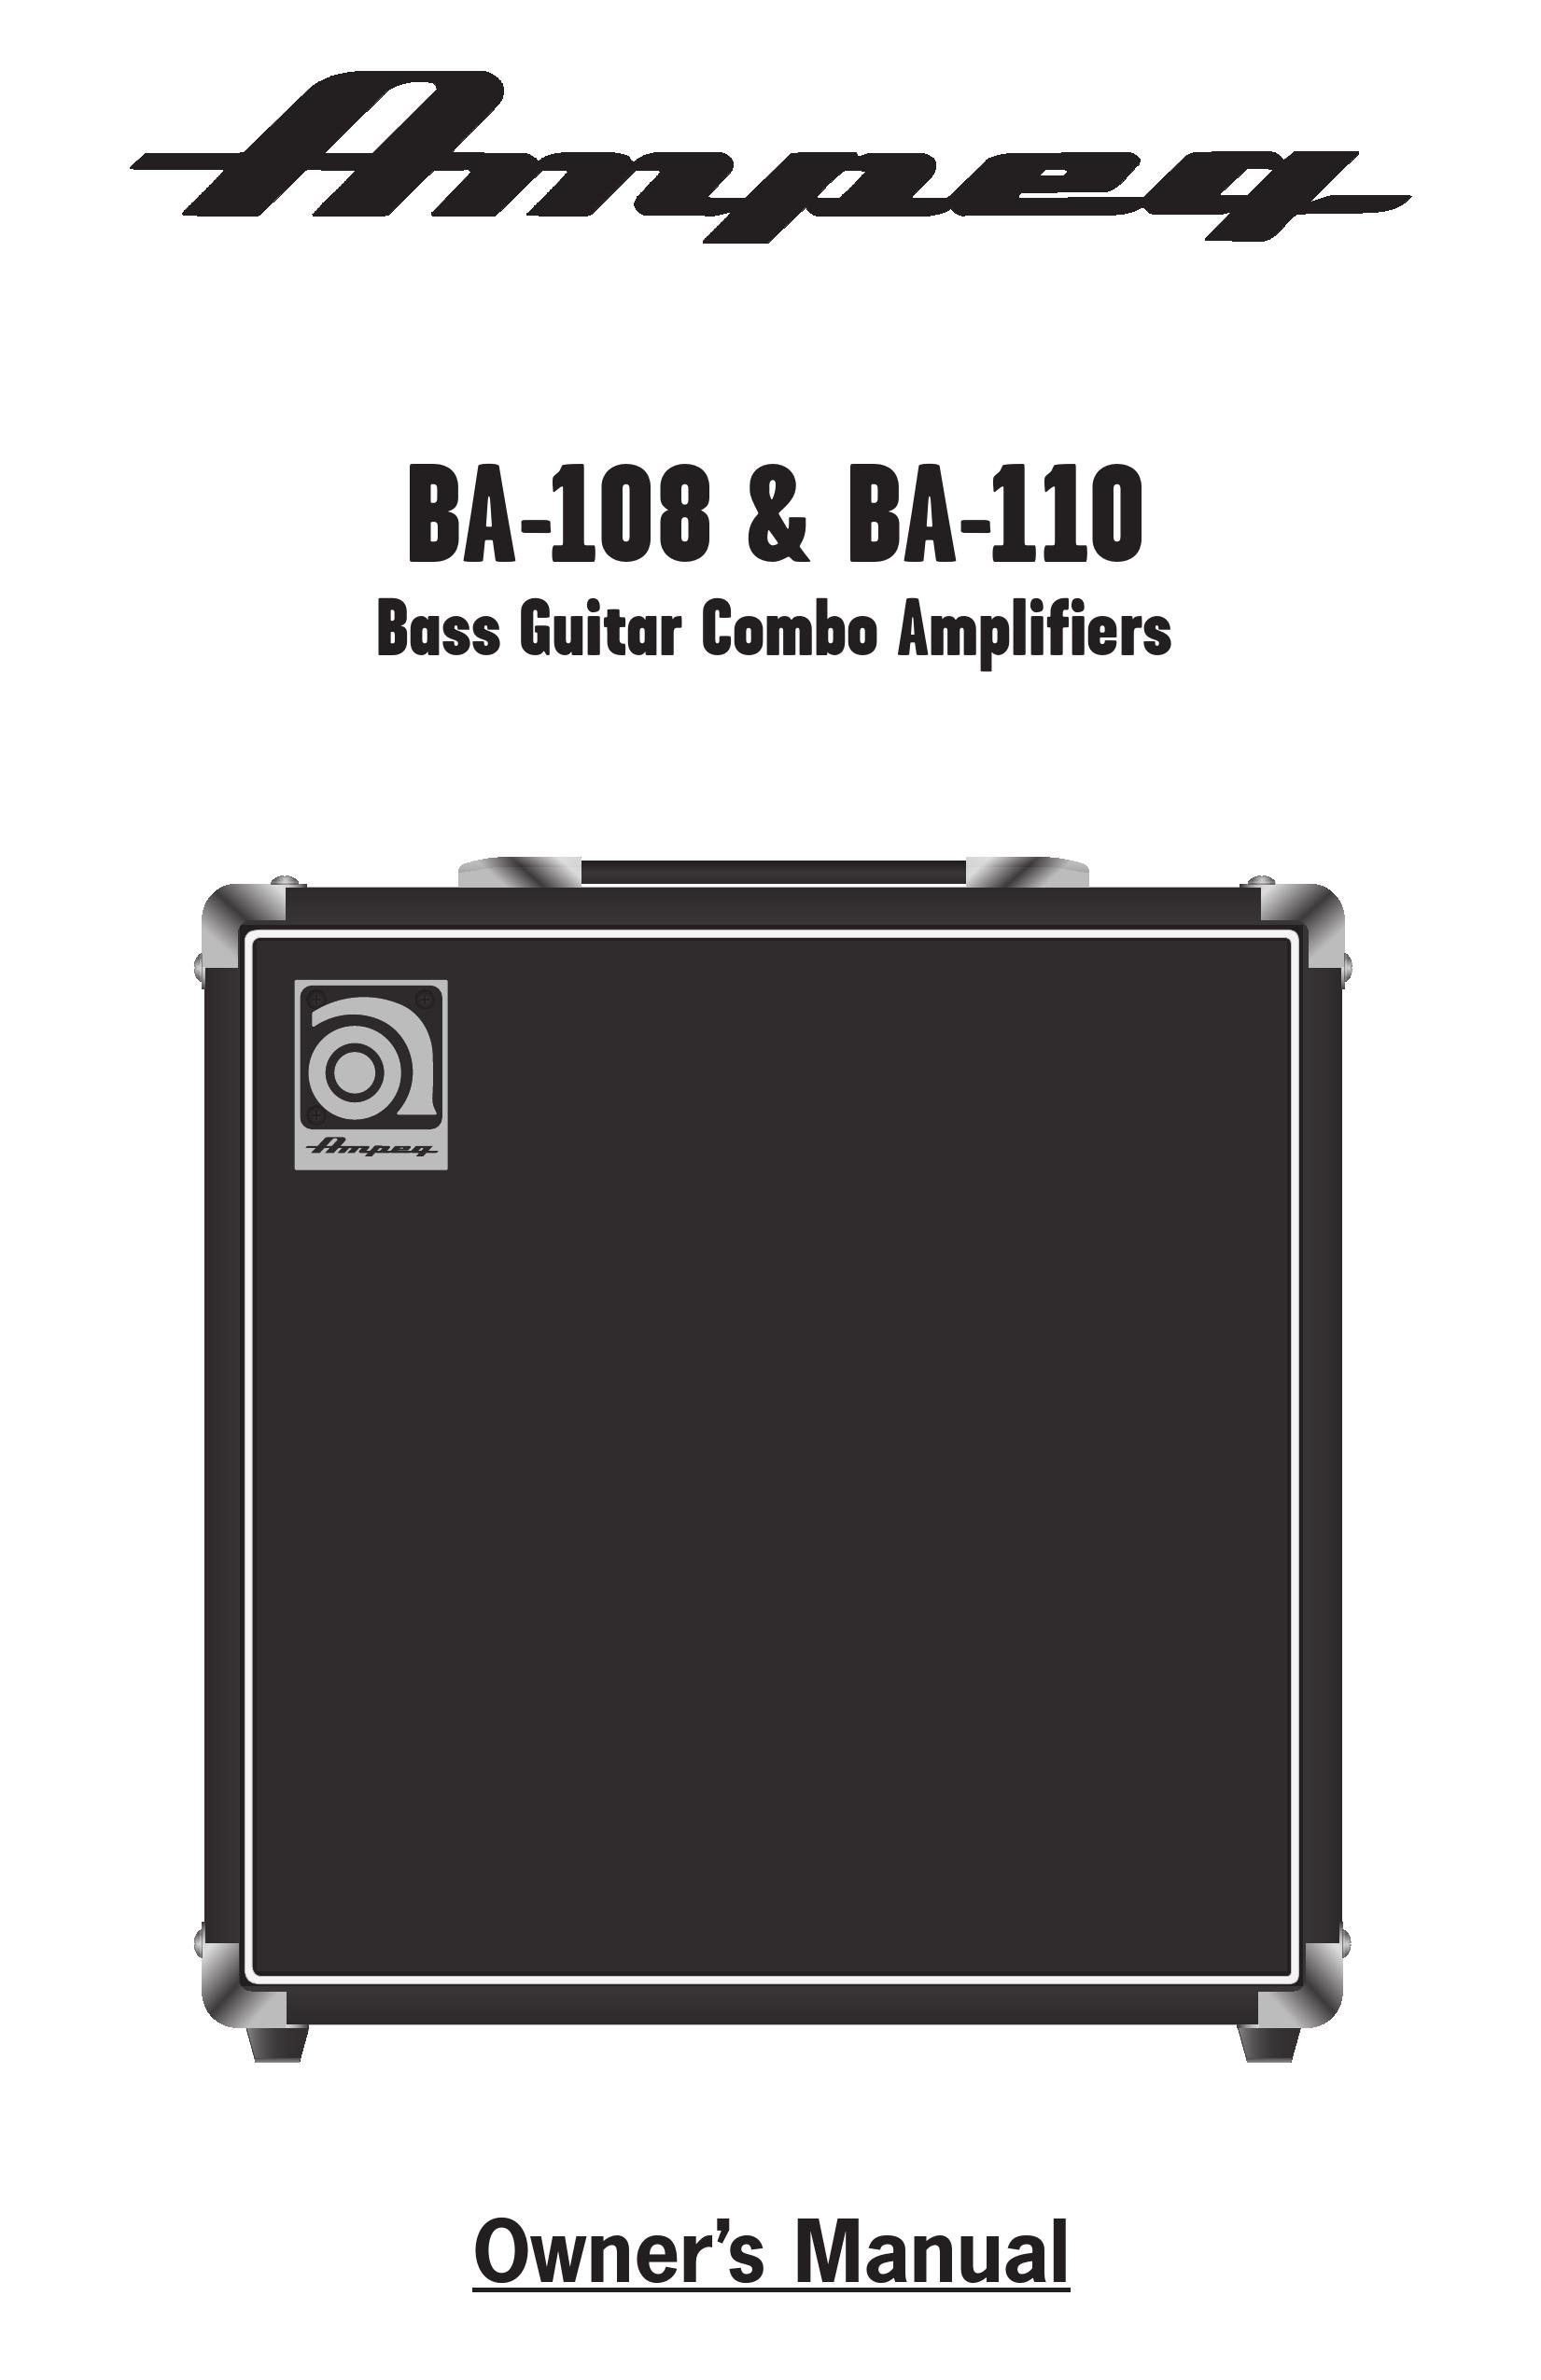 Ampeg BA-108 Musical Instrument Amplifier User Manual (Page 1)